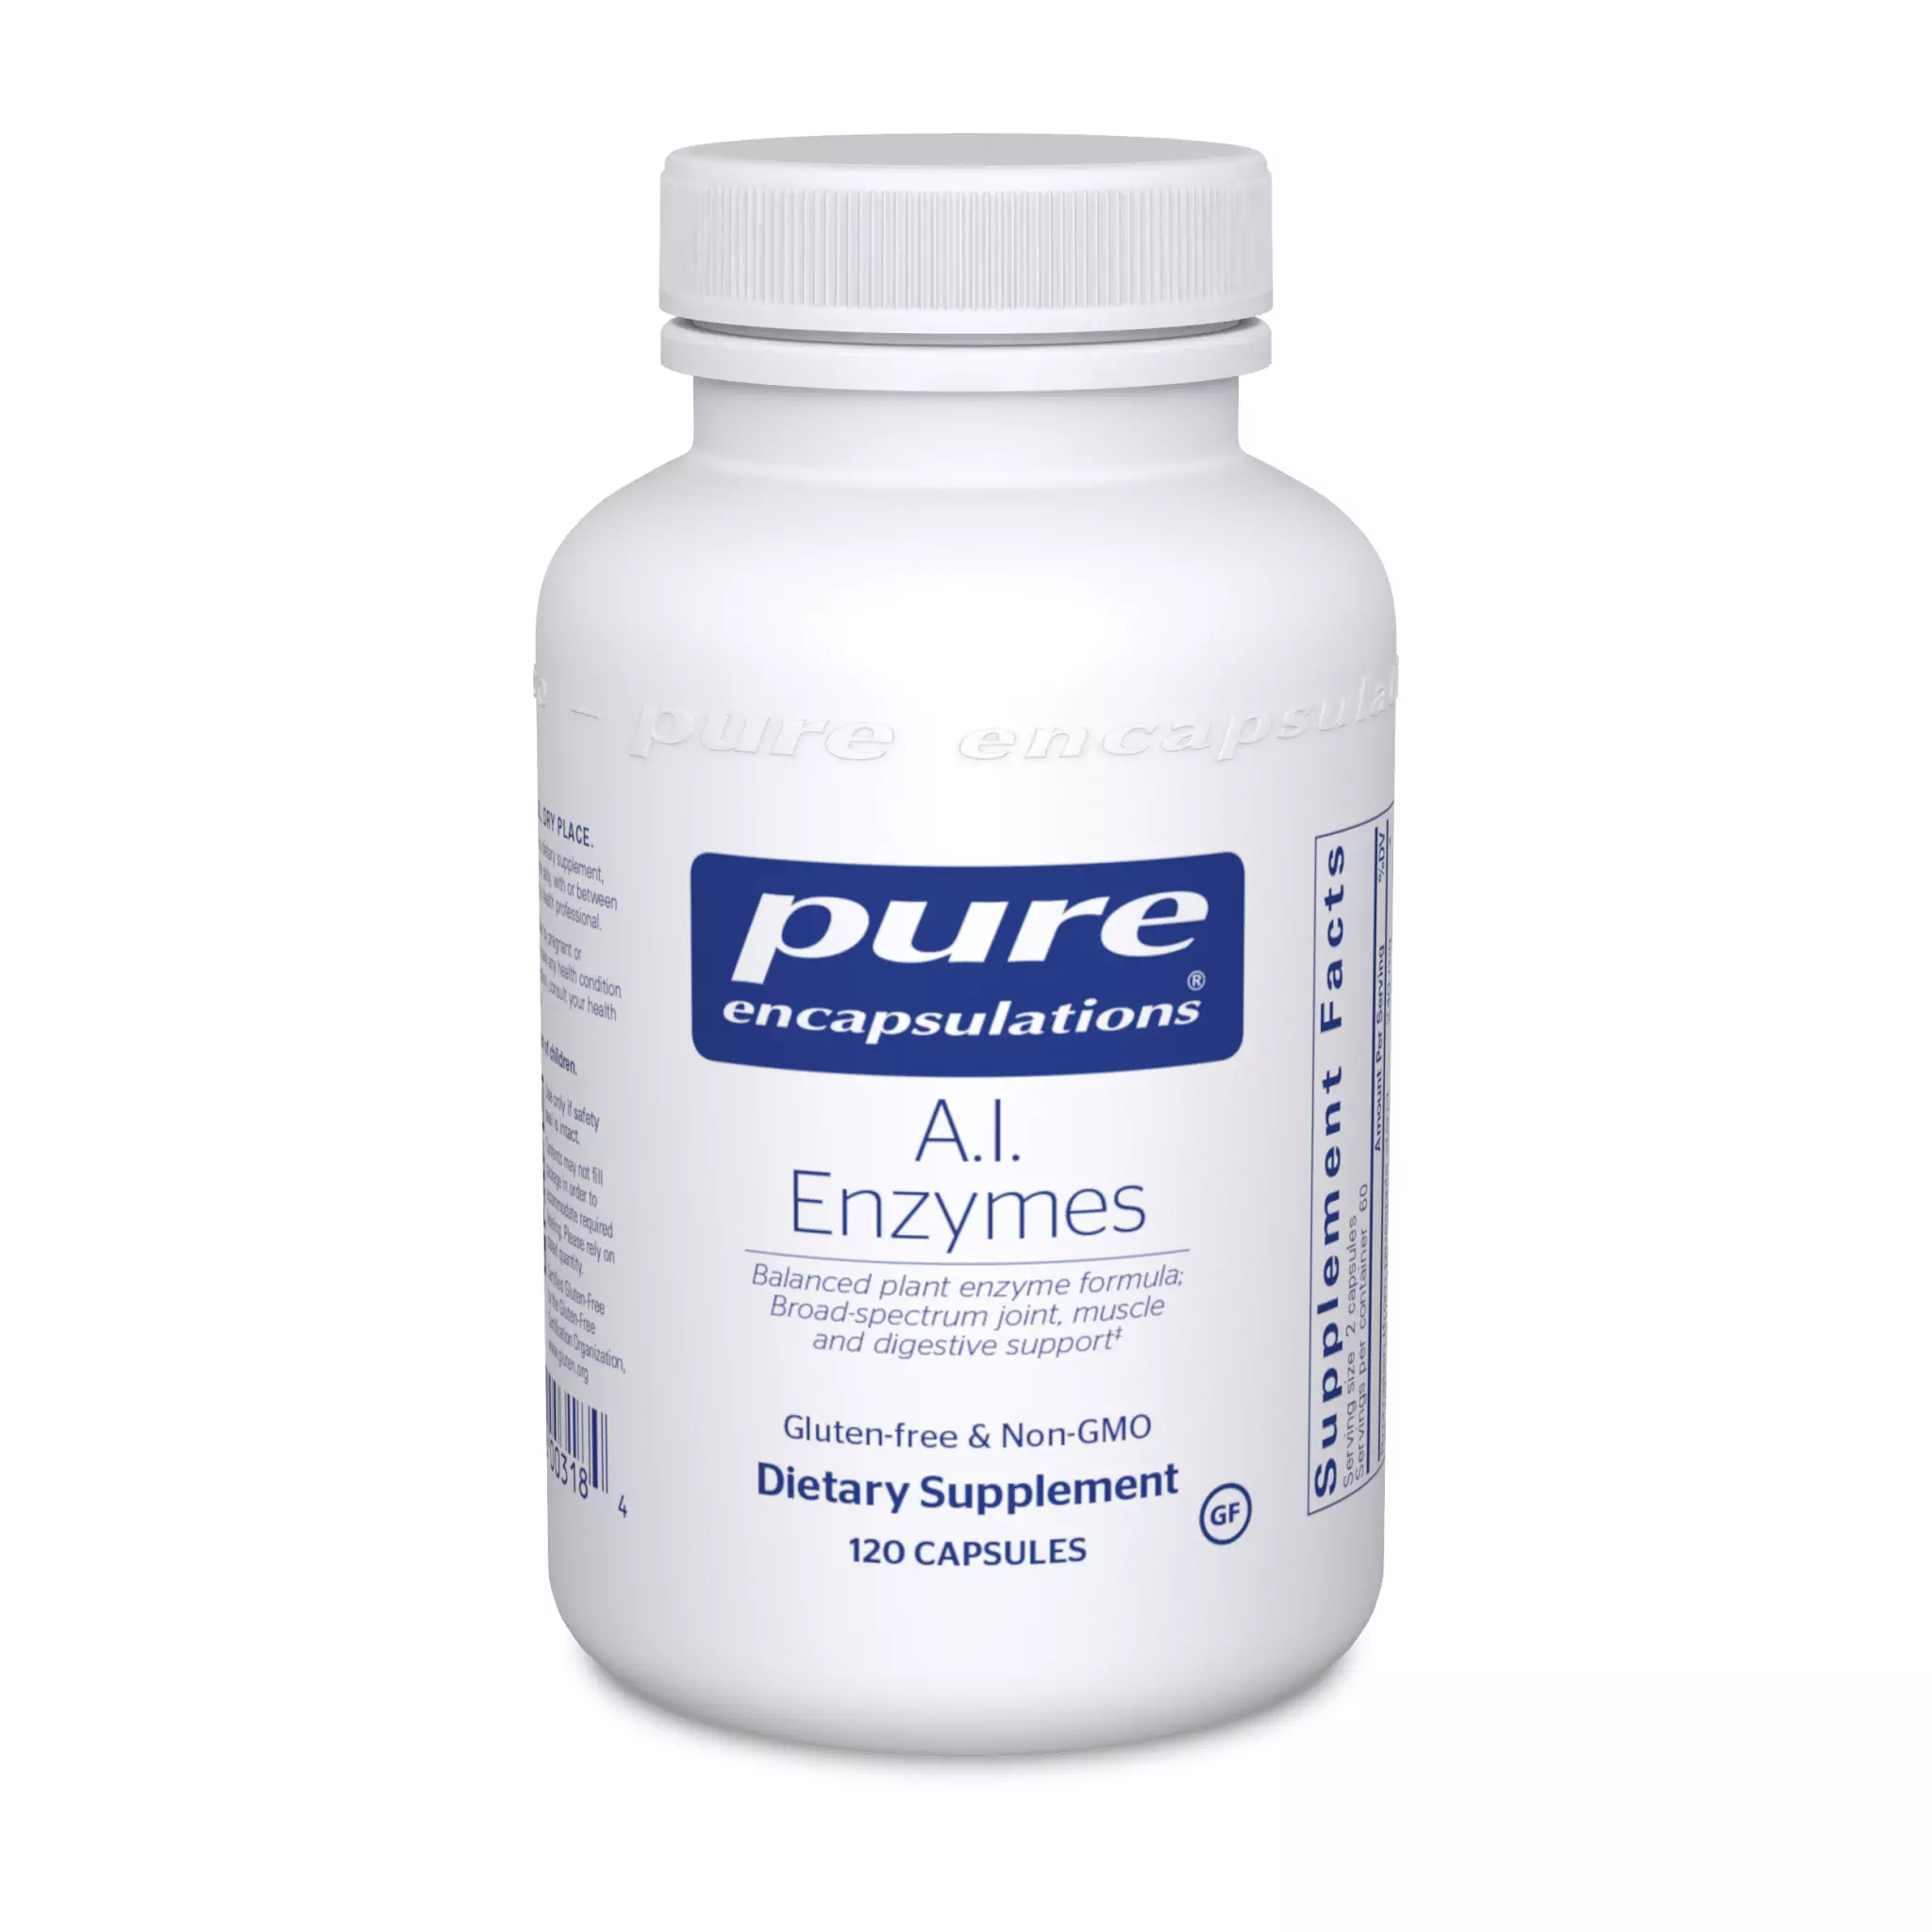 Pure Encapsulations - A I Enzymes